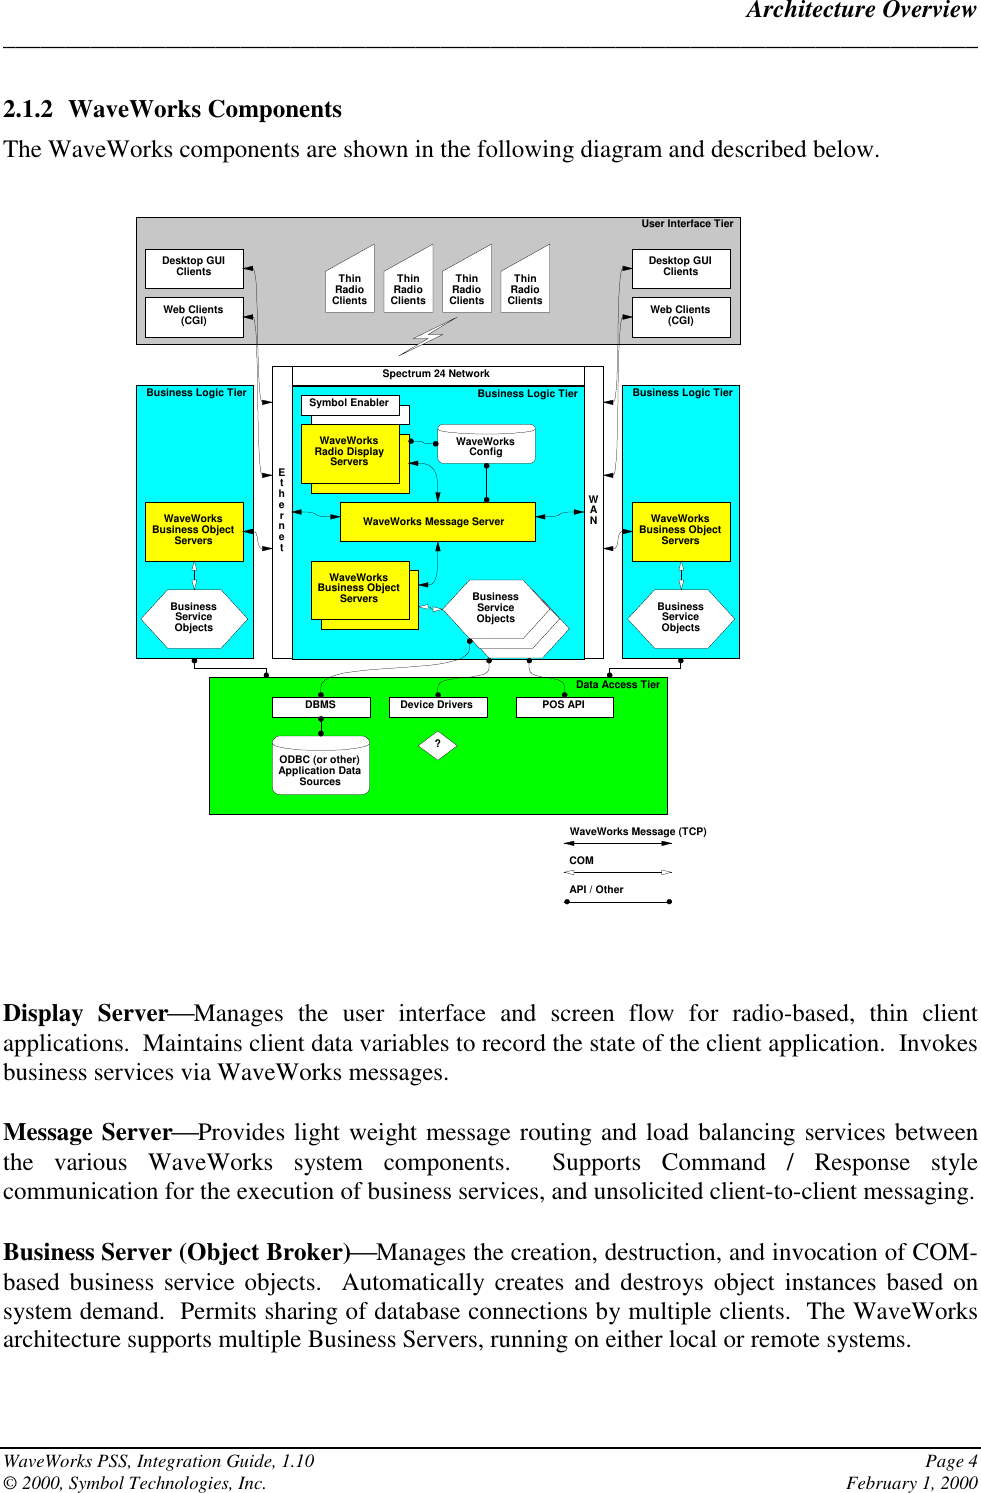 Architecture Overview______________________________________________________________________________WaveWorks PSS, Integration Guide, 1.10 Page 4© 2000, Symbol Technologies, Inc. February 1, 20002.1.2 WaveWorks ComponentsThe WaveWorks components are shown in the following diagram and described below.Display ServerManages the user interface and screen flow for radio-based, thin clientapplications.  Maintains client data variables to record the state of the client application.  Invokesbusiness services via WaveWorks messages.Message ServerProvides light weight message routing and load balancing services betweenthe various WaveWorks system components.  Supports Command / Response stylecommunication for the execution of business services, and unsolicited client-to-client messaging.Business Server (Object Broker)Manages the creation, destruction, and invocation of COM-based business service objects.  Automatically creates and destroys object instances based onsystem demand.  Permits sharing of database connections by multiple clients.  The WaveWorksarchitecture supports multiple Business Servers, running on either local or remote systems.Business Logic TierUser Interface TierData Access TierBusiness Logic TierBusiness Logic TierThinRadioClientsWaveWorks Message ServerWaveWorksRadio DisplayServersODBC (or other)Application DataSourcesWaveWorksBusiness ObjectServers?Desktop GUIClients ThinRadioClientsThinRadioClientsThinRadioClientsWeb Clients(CGI)Symbol EnablerWaveWorksConfigSpectrum 24 NetworkEthernetDBMS Device Drivers POS APIWaveWorksBusiness ObjectServersWANBusinessServiceObjectsWaveWorksBusiness ObjectServersDesktop GUIClientsWeb Clients(CGI)BusinessServiceObjectsBusinessServiceObjectsWaveWorks Message (TCP)COMAPI / Other